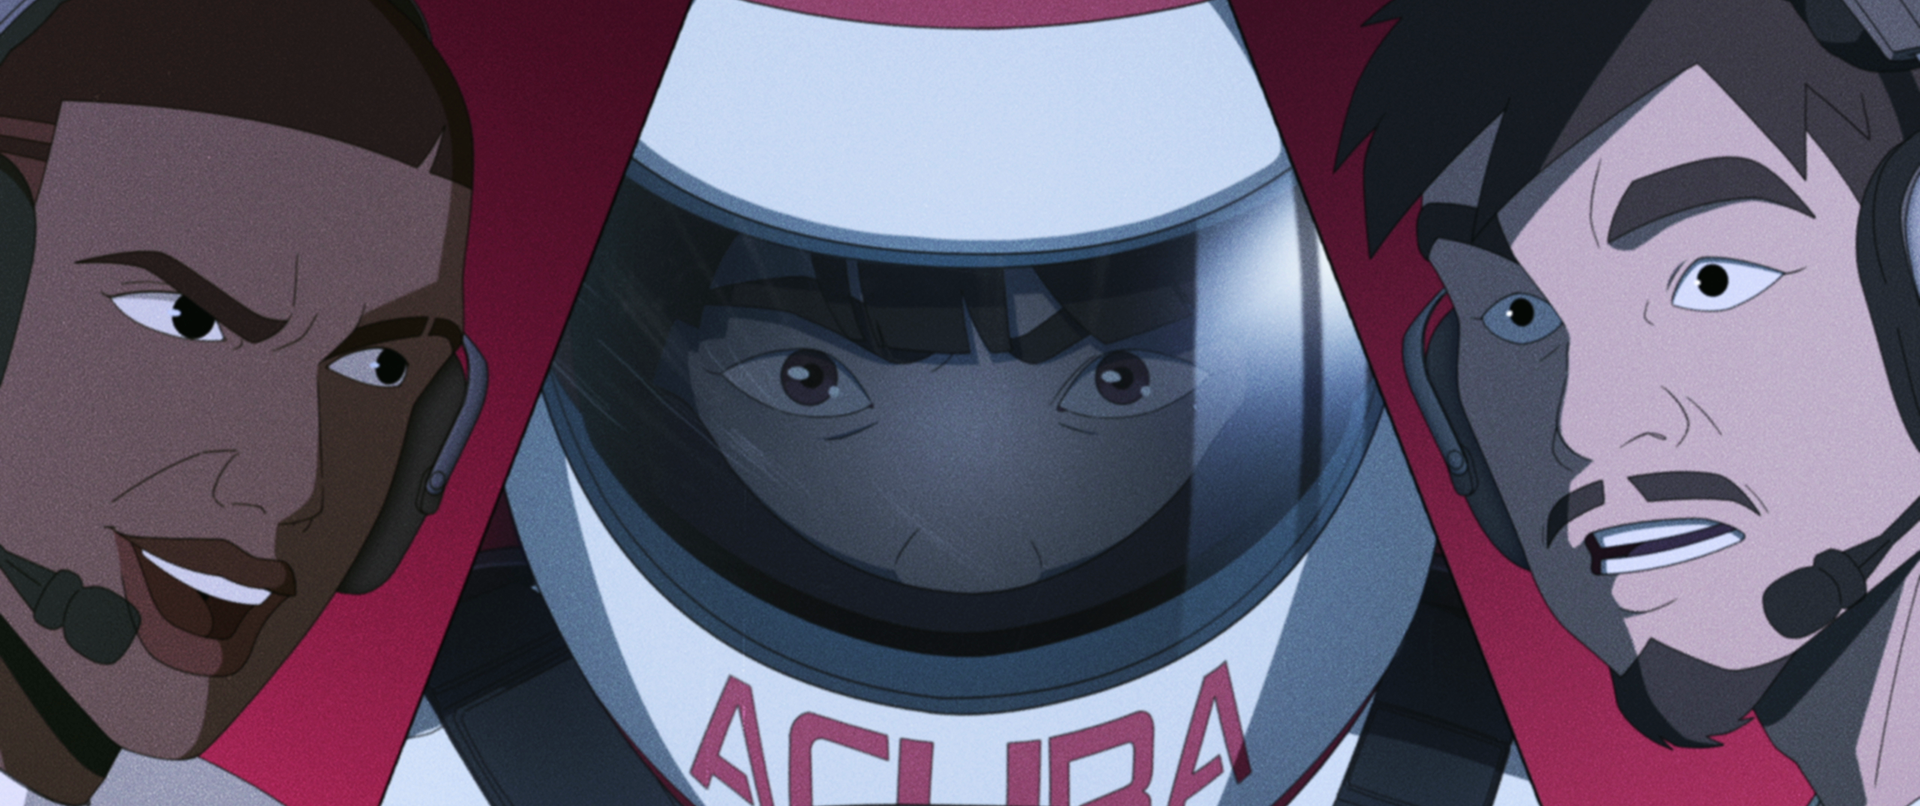 Acura Anime Gifts & Merchandise for Sale | Redbubble